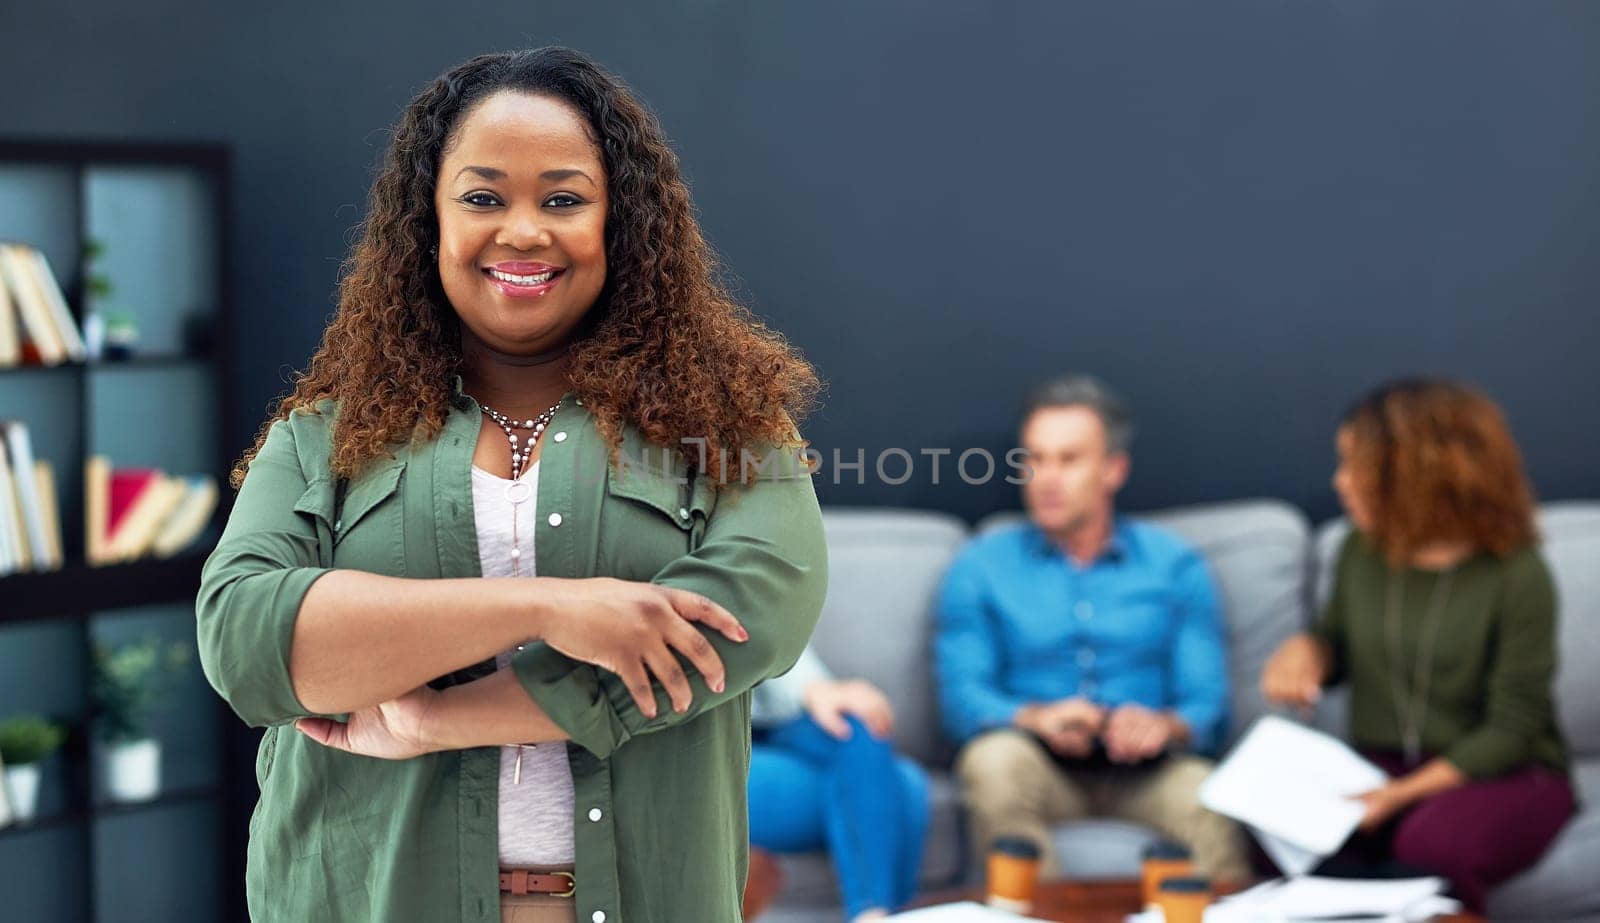 She runs the show around here. Portrait of a confident young businesswoman with her team blurred in the background